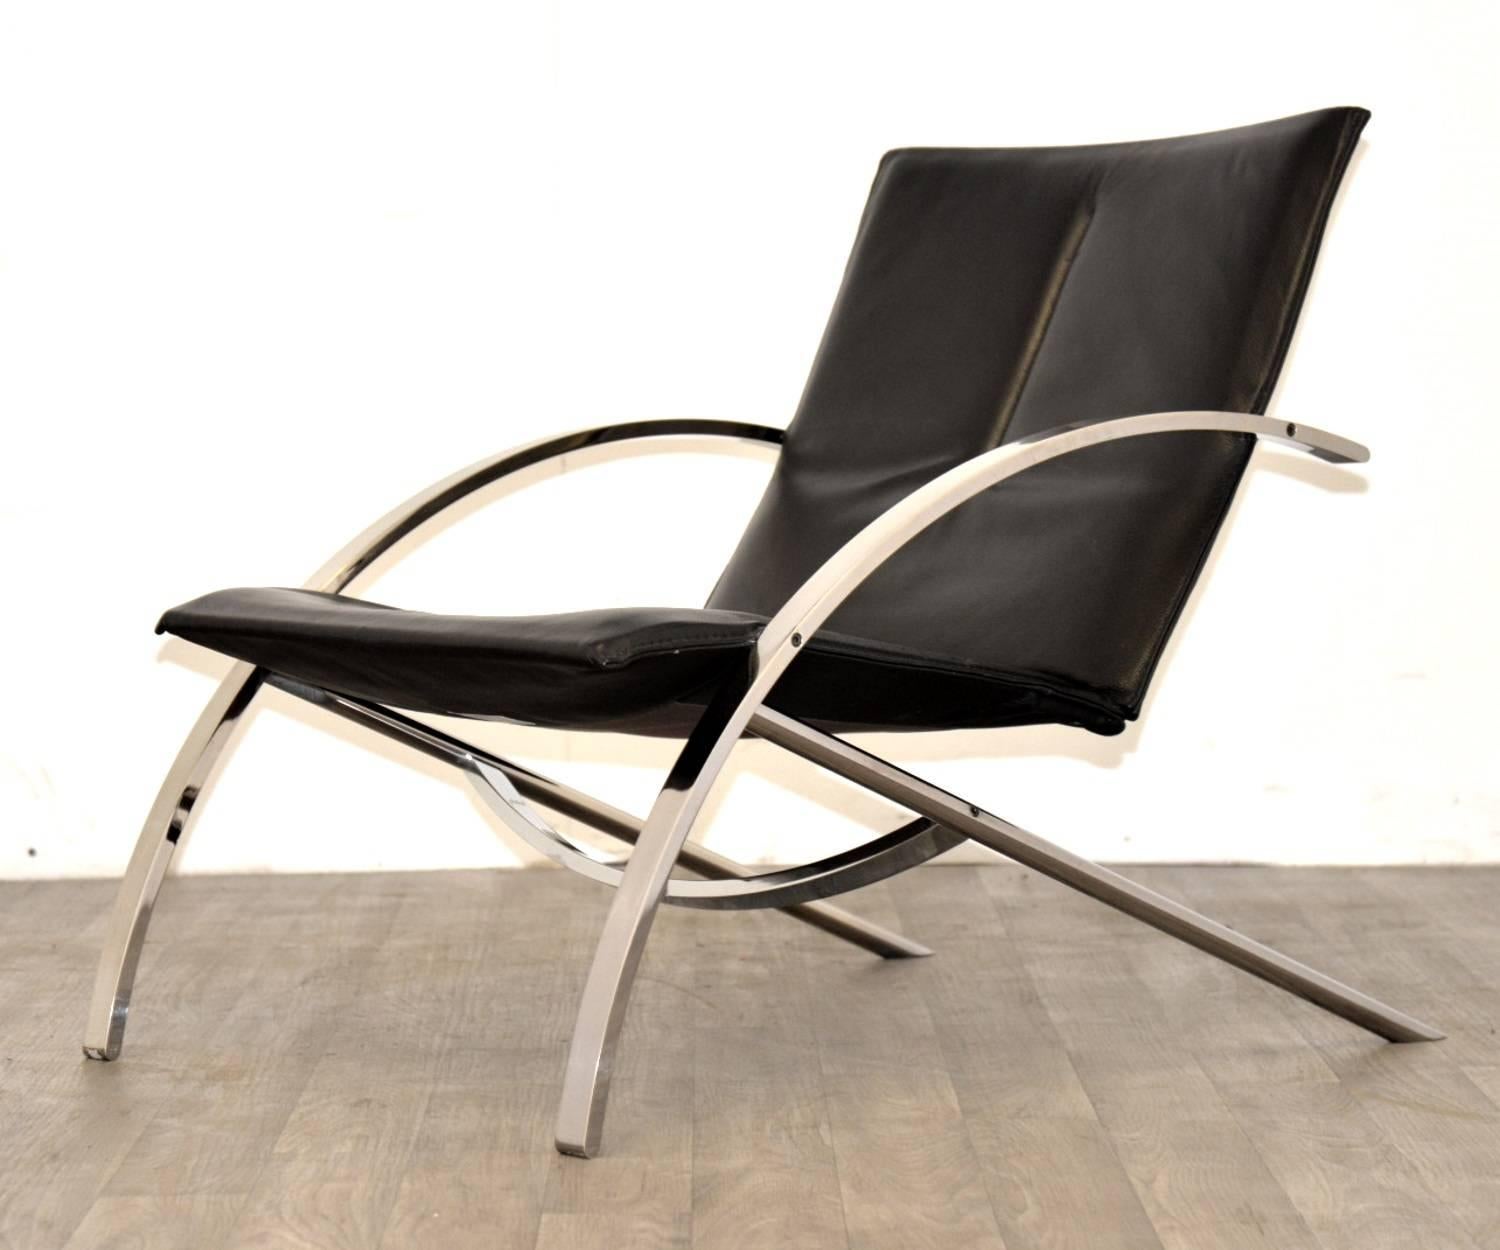 Late 20th Century Paul Tuttle Arco Lounge Chairs for Strässle of Switzerland, 1970s For Sale